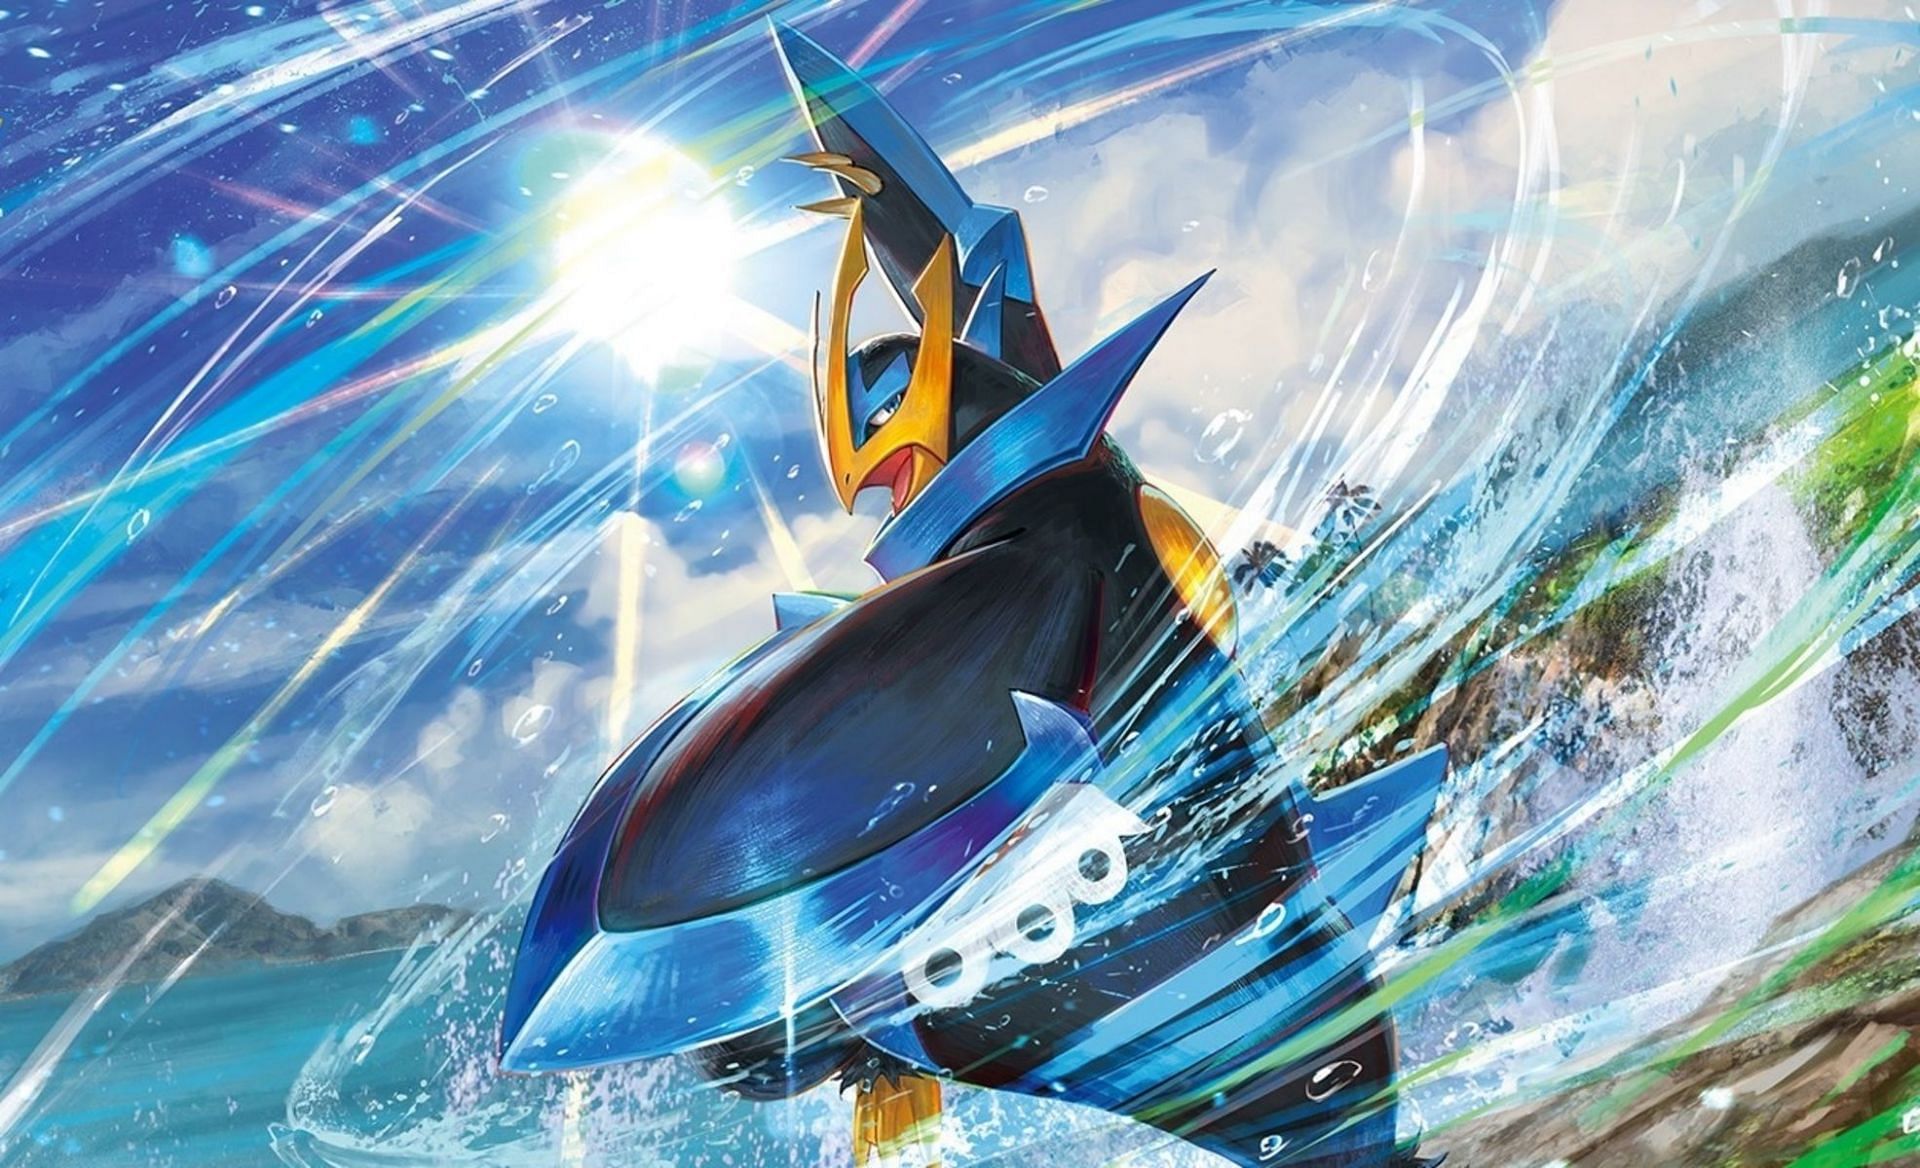 Empoleon as it is depicted in the Pokemon Trading Card Game (Image via The Pokemon Company)